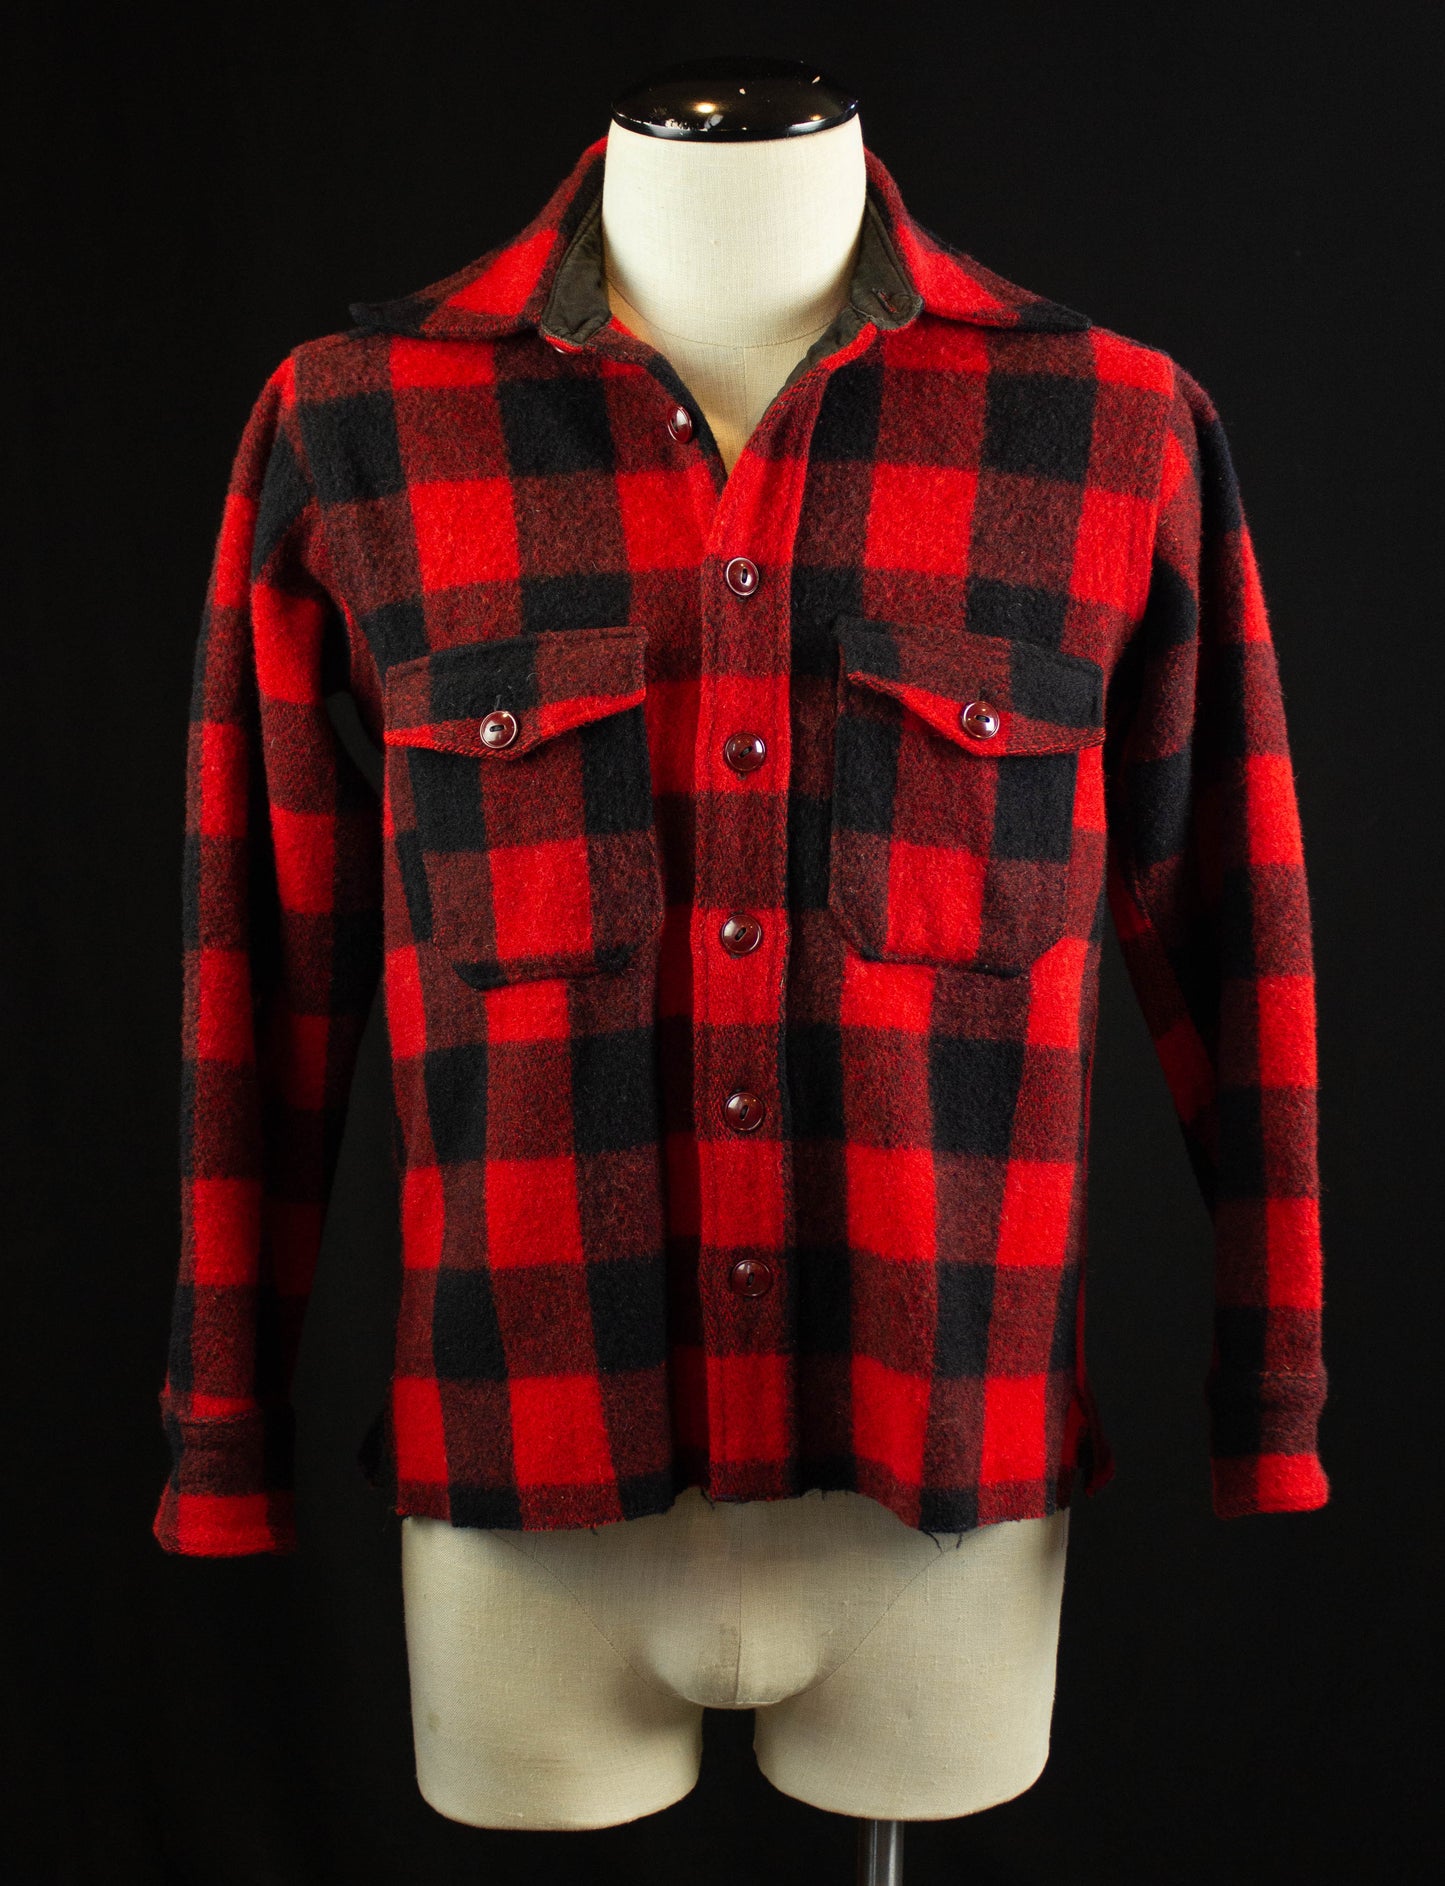 Vintage Woolrich Buffalo Plaid Wool Flannel Shirt 50s Red and Black Small-Medium